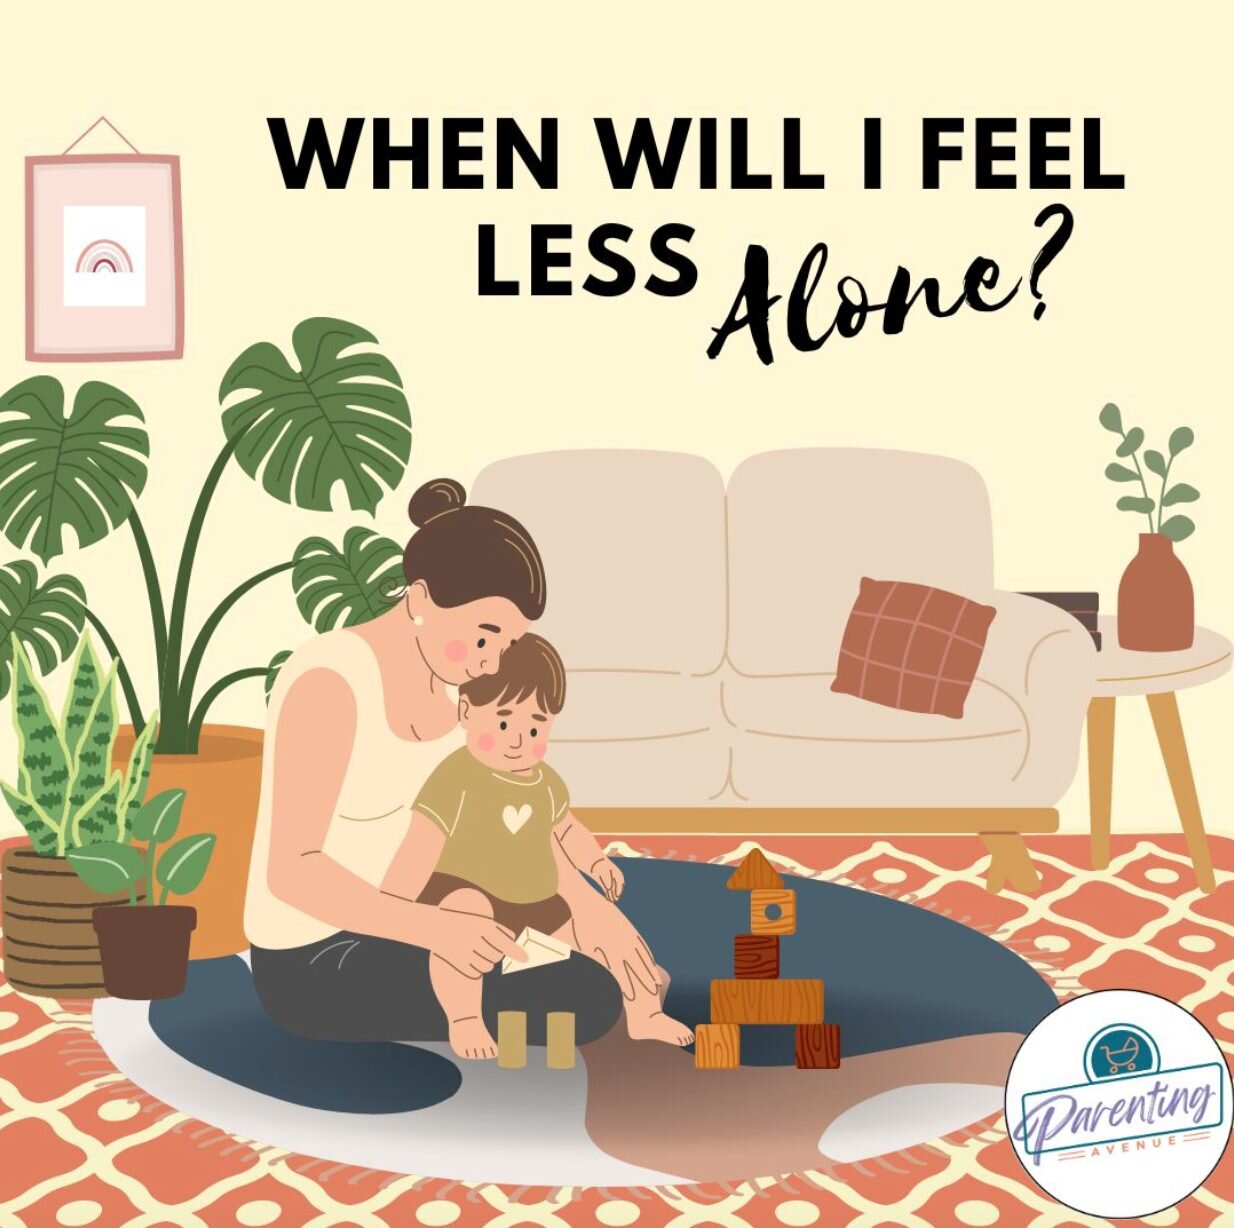 The second you sit down with your group, seriously!
It&rsquo;s hard to realize sometimes, but you are never alone. However, to FEEL less alone, you&rsquo;re going to need to get yourself to Parenting Avenue. And the second you do, you&rsquo;ll start 